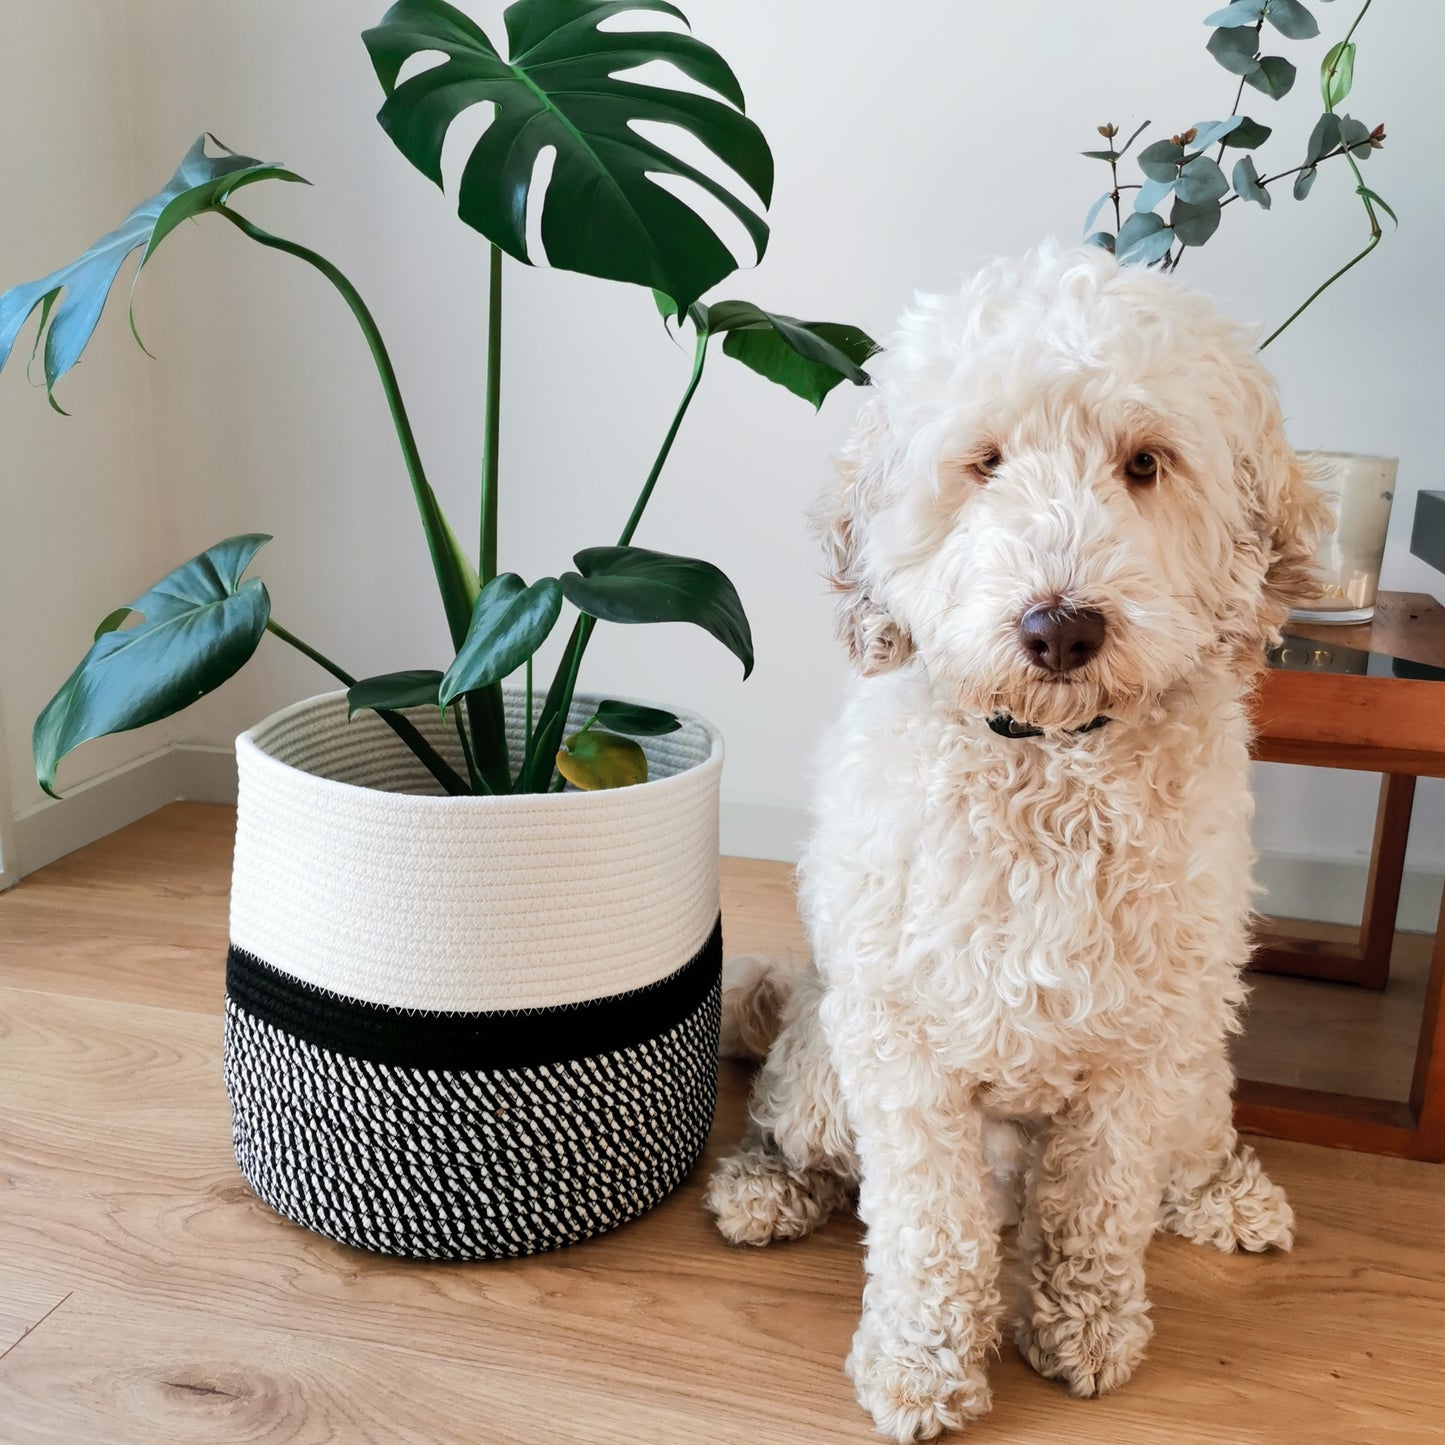 Stylish handwoven plant baskets to add minimalistic modern and neutral design to home office. Also good for storing your indoor pet-friendly plants.